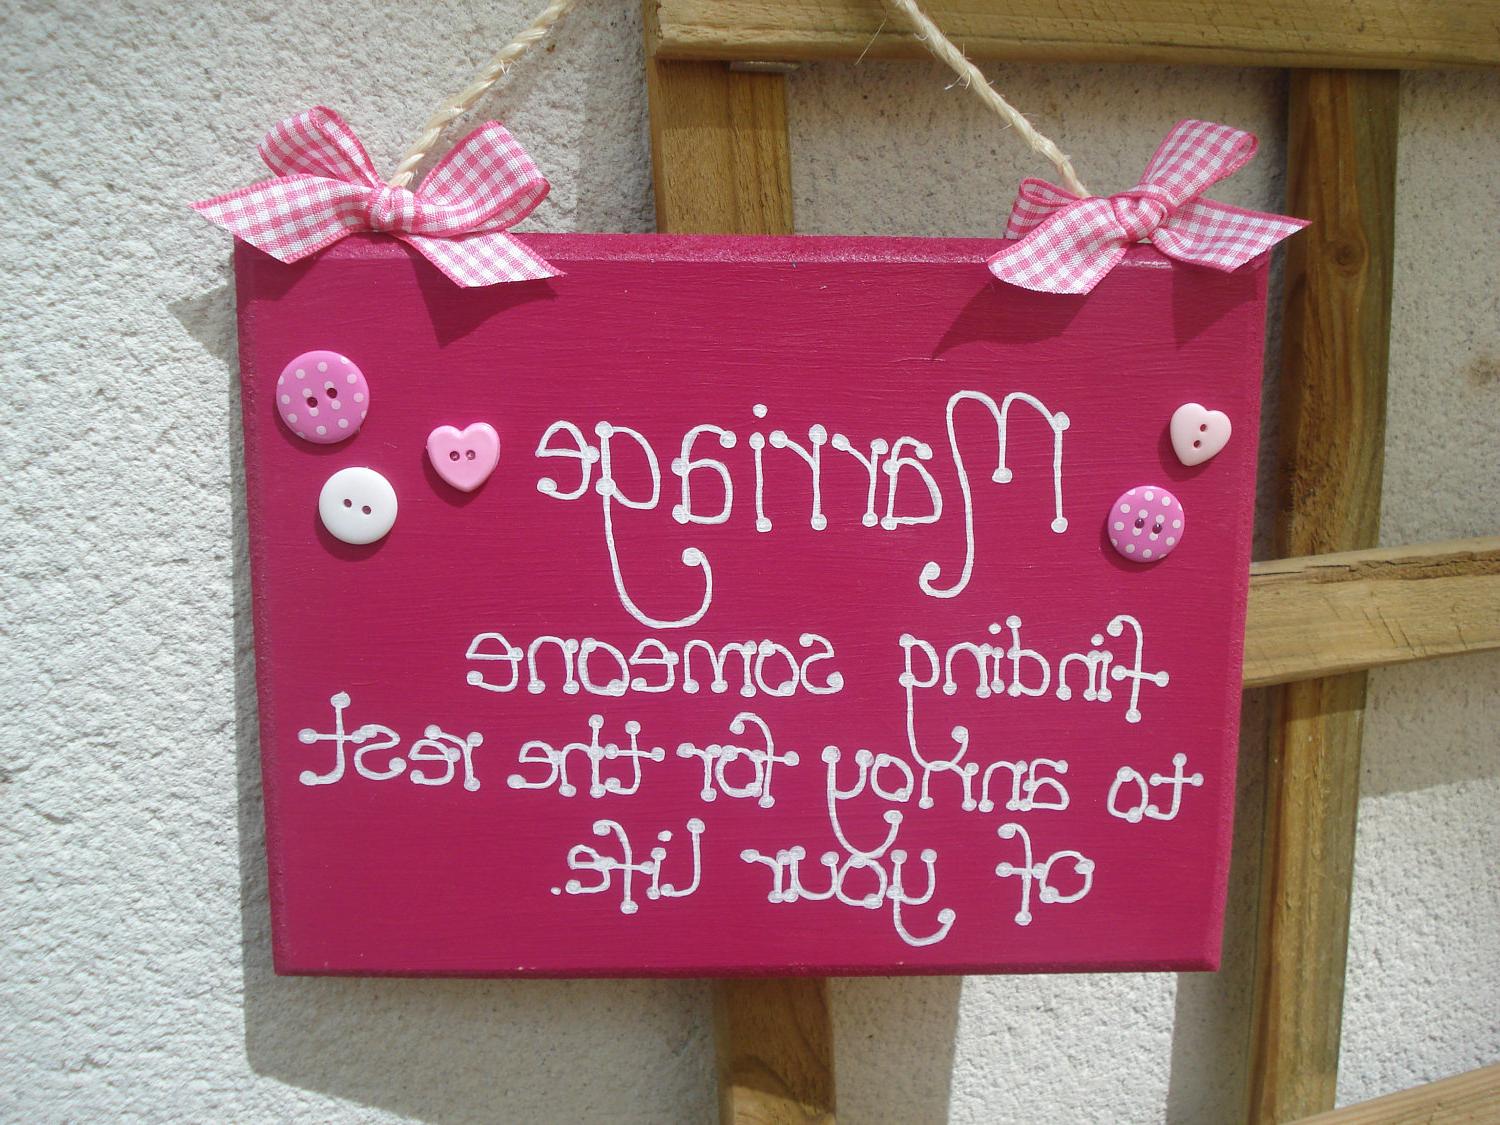 MARRIAGE primitive sign plaque in pinks great wedding gift idea